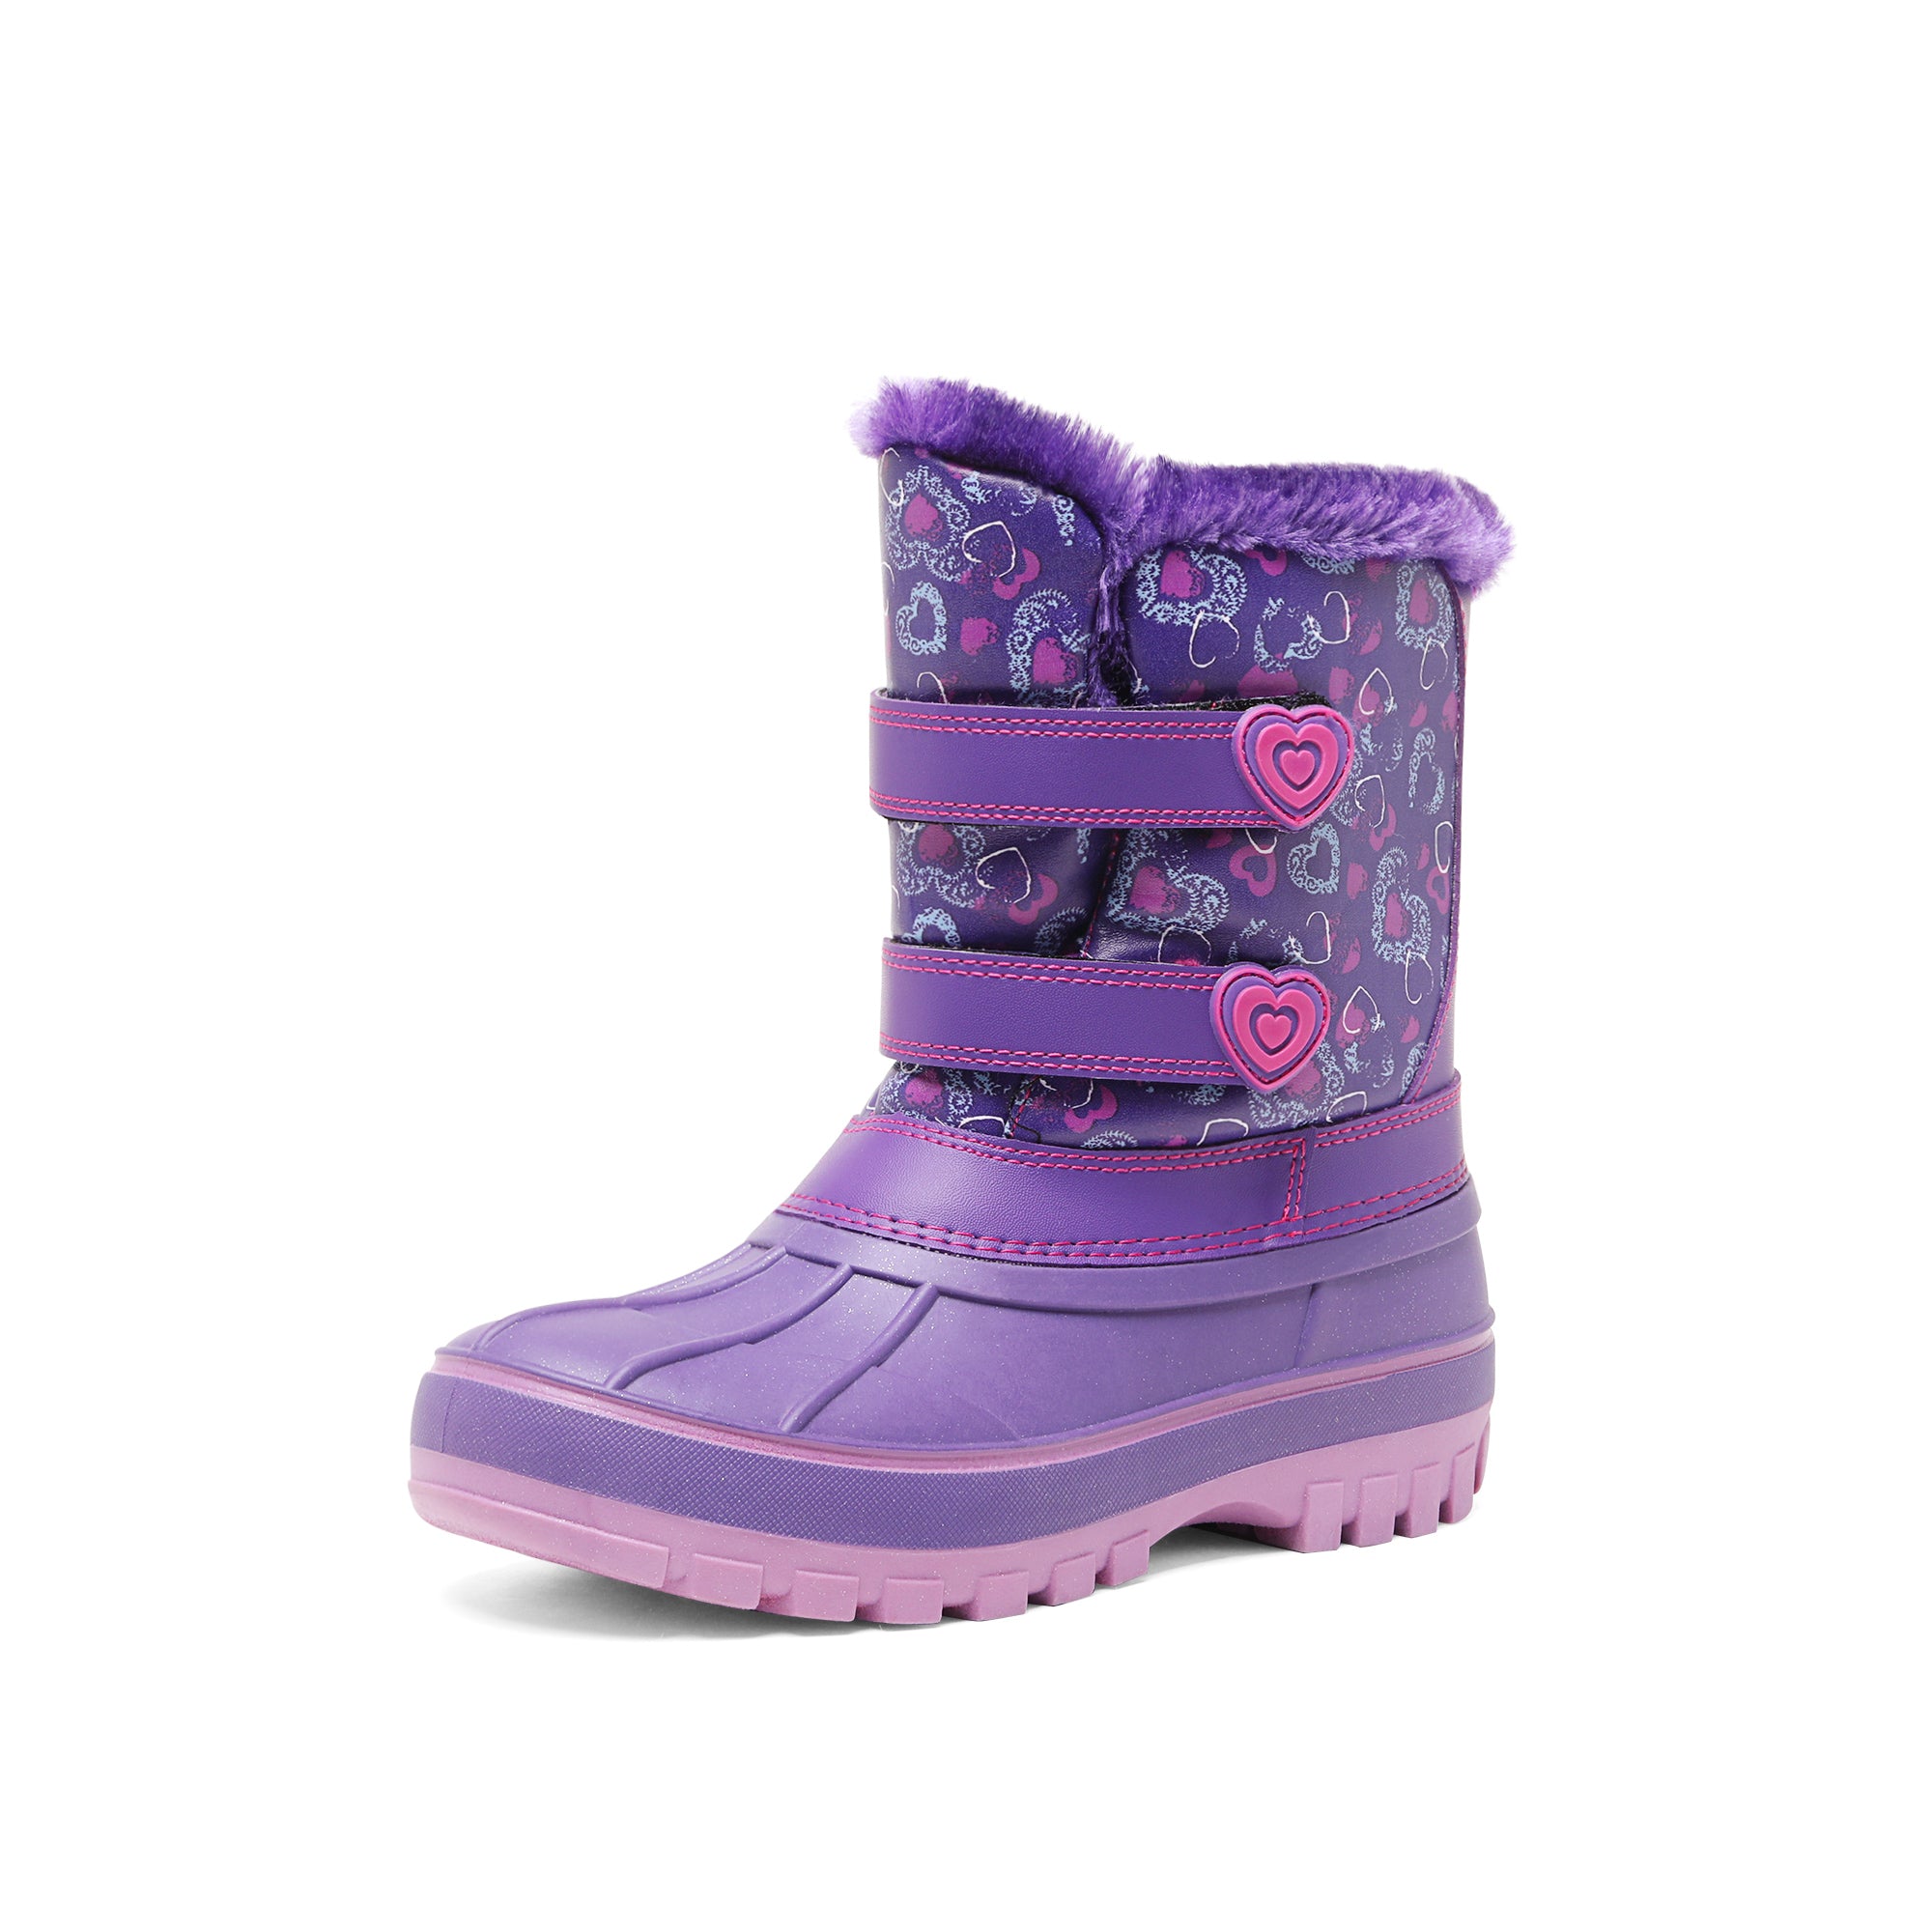 Girls and Boys Snow Boots | Waterproof Kids Boots-Dream Pairs